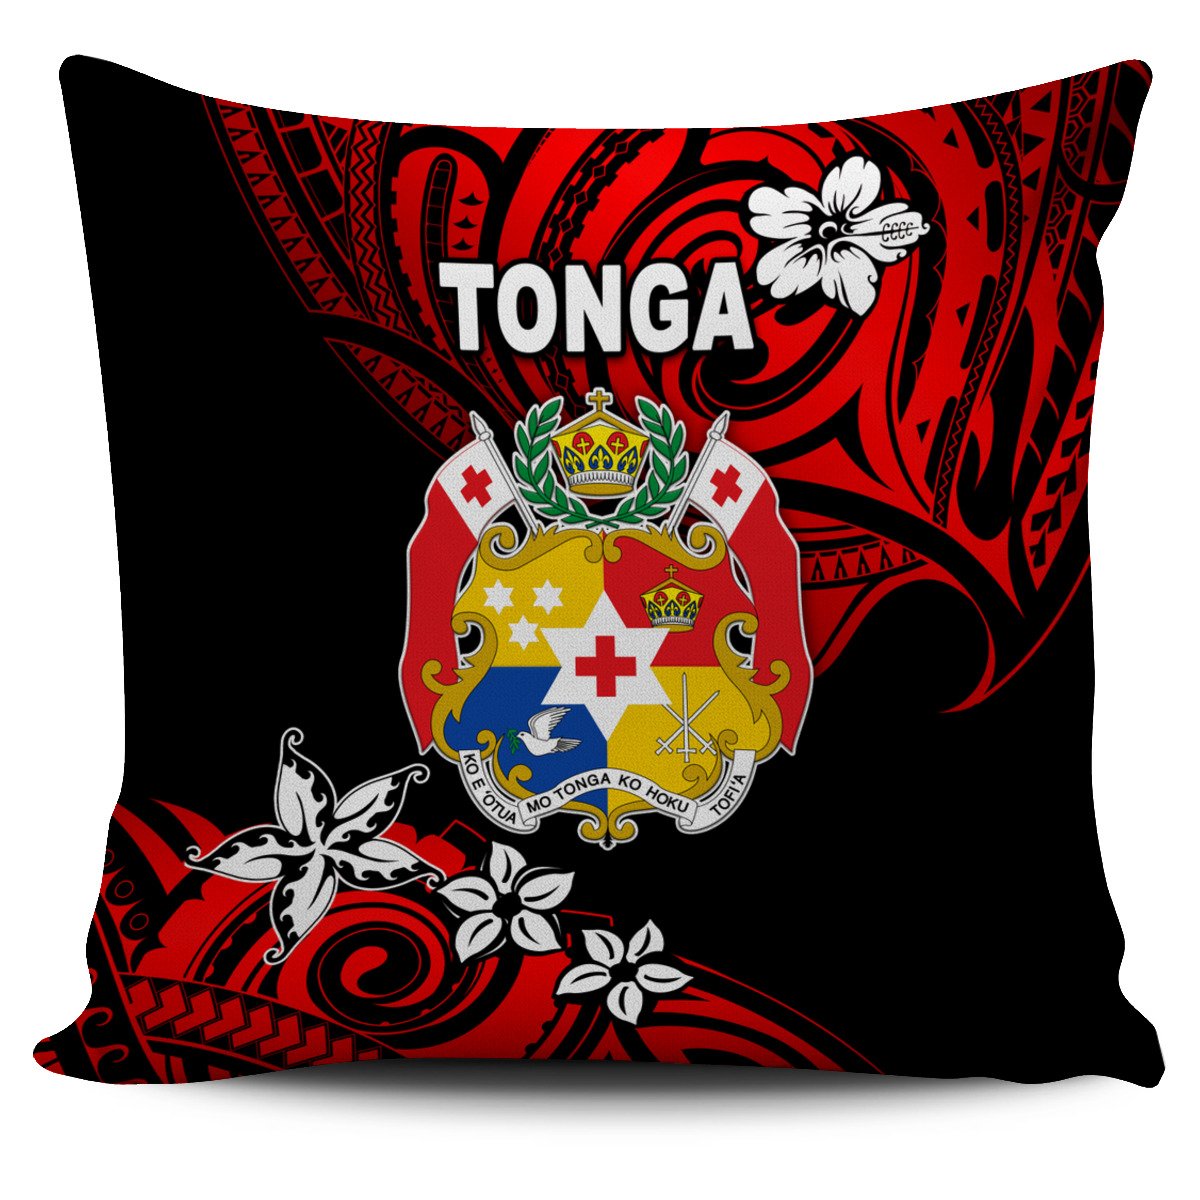 Mate Ma'a Tonga Rugby Pillow Cover Polynesian Unique Vibes - Red Pillow Cover One Size Red - Polynesian Pride